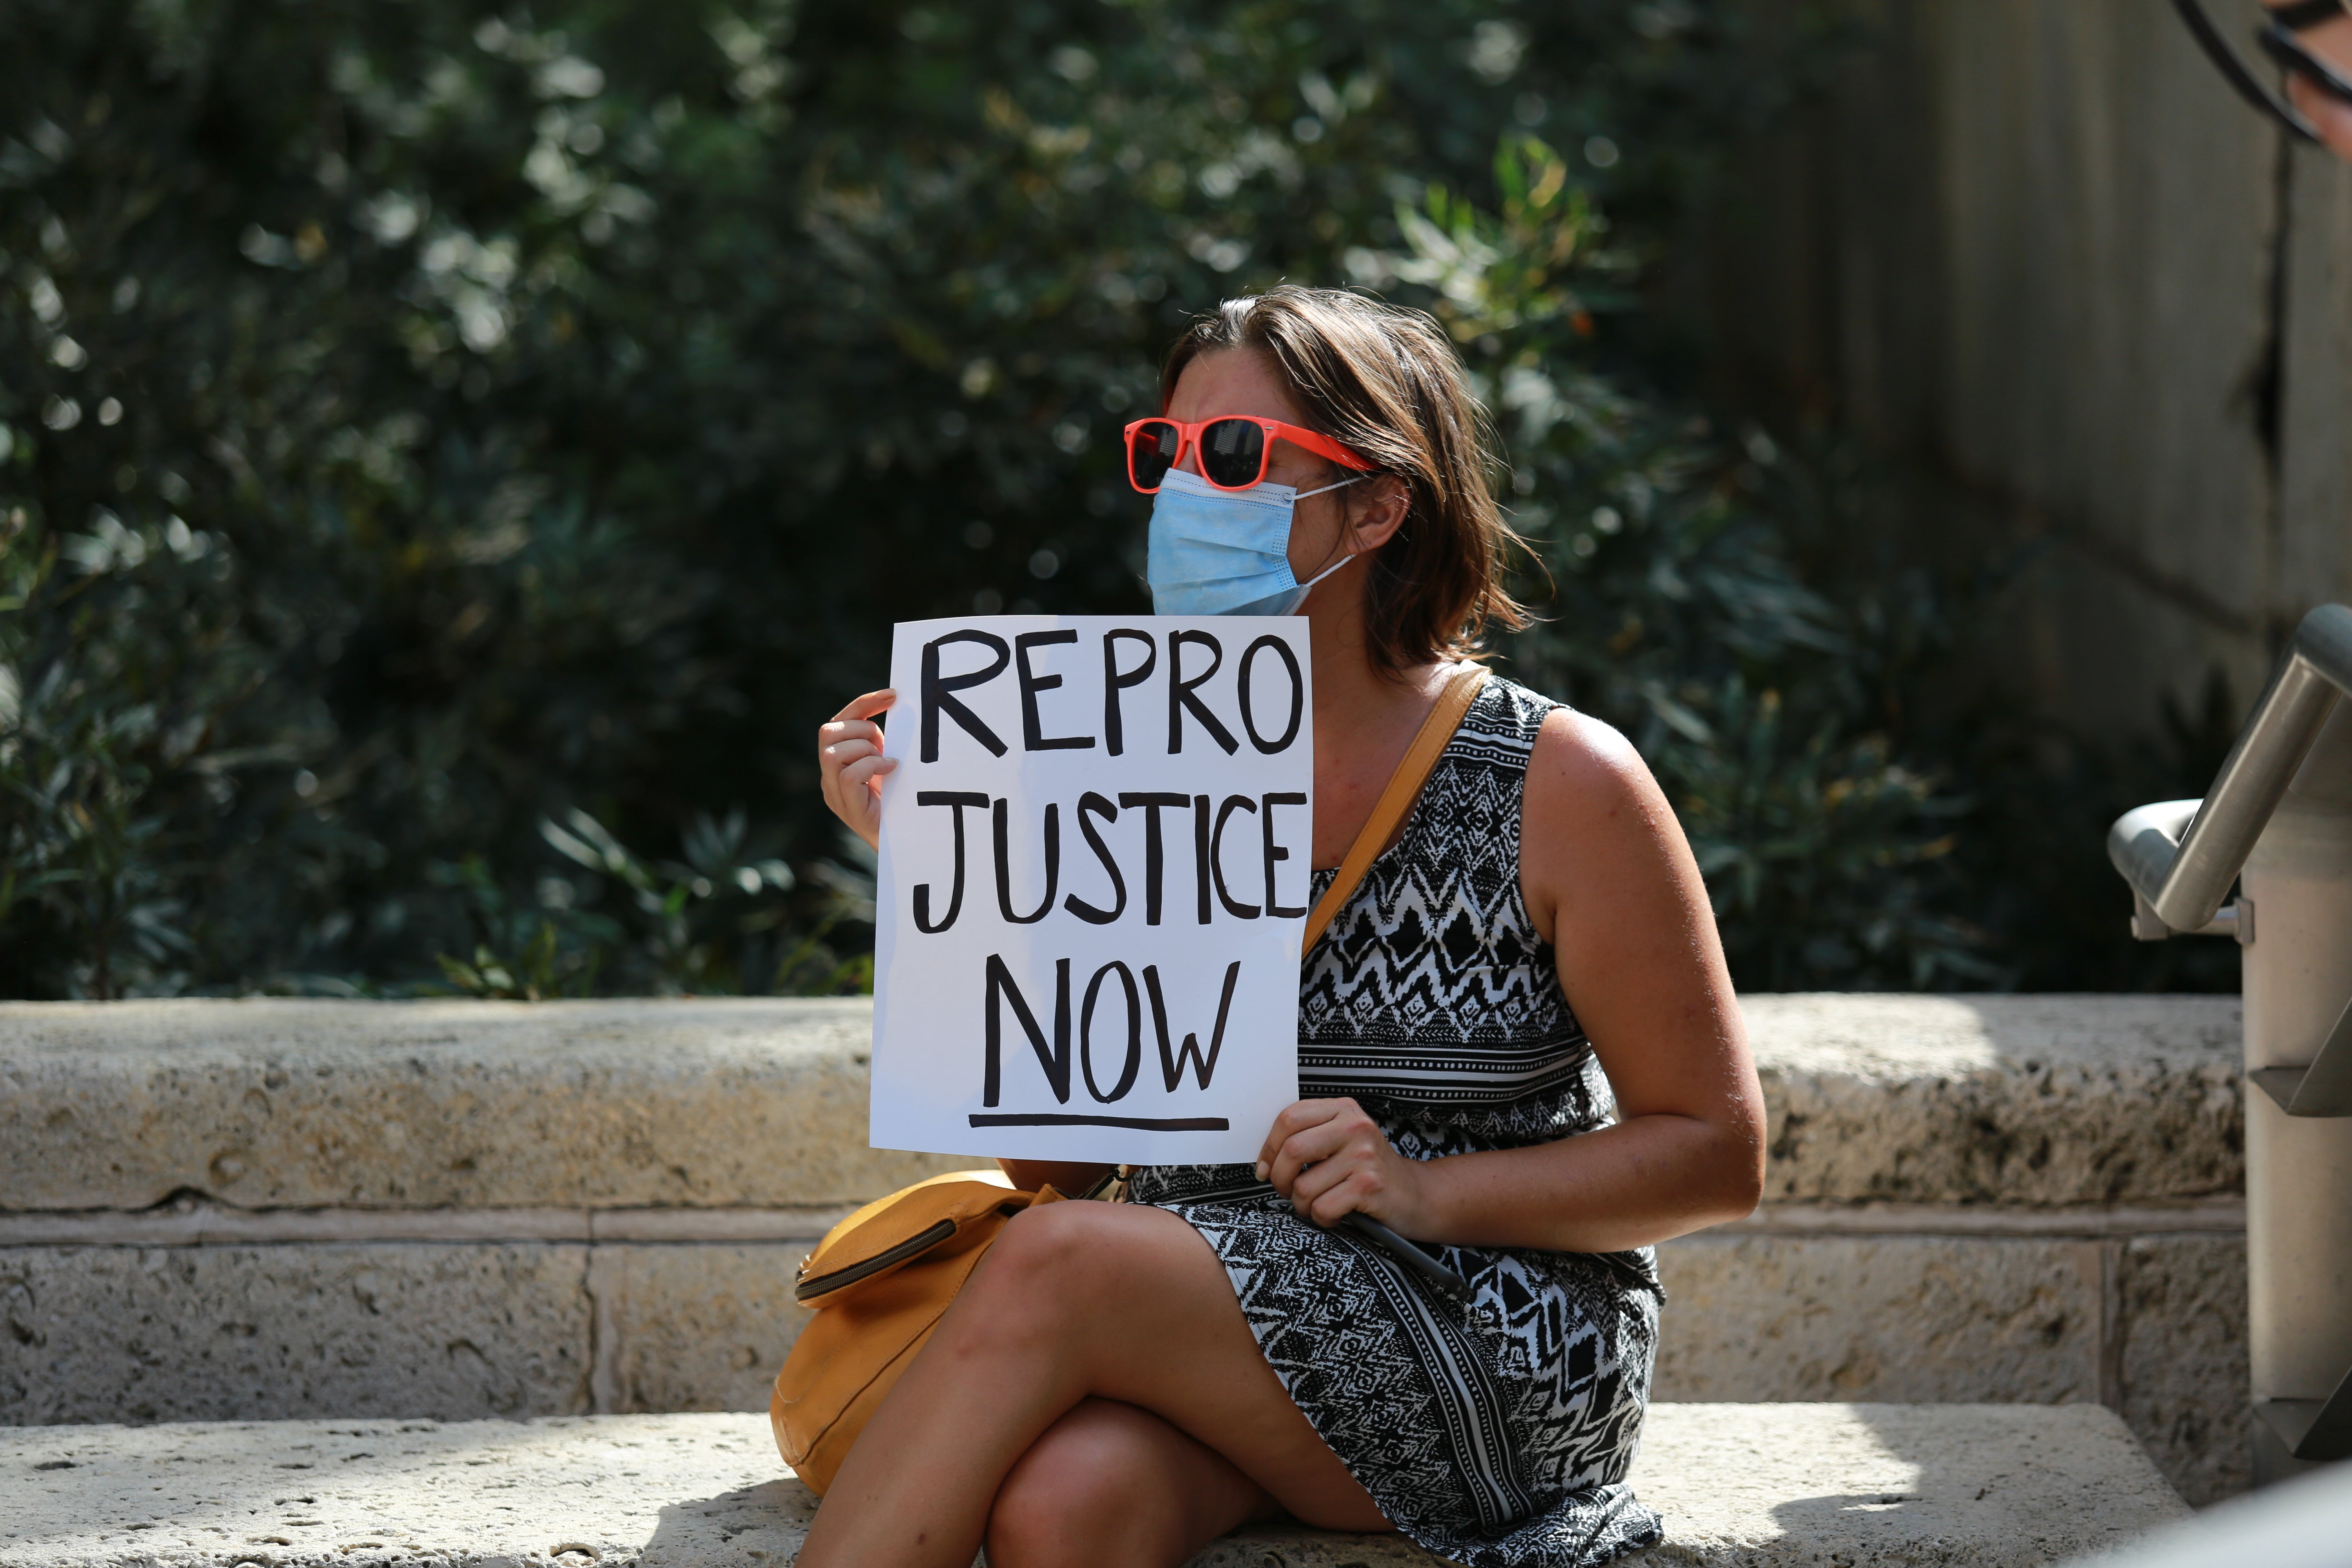 A woman in a dress sits on a bench wearing a mask and sunglasses, holding a sign that says, "REPRO JUSTICE NOW."